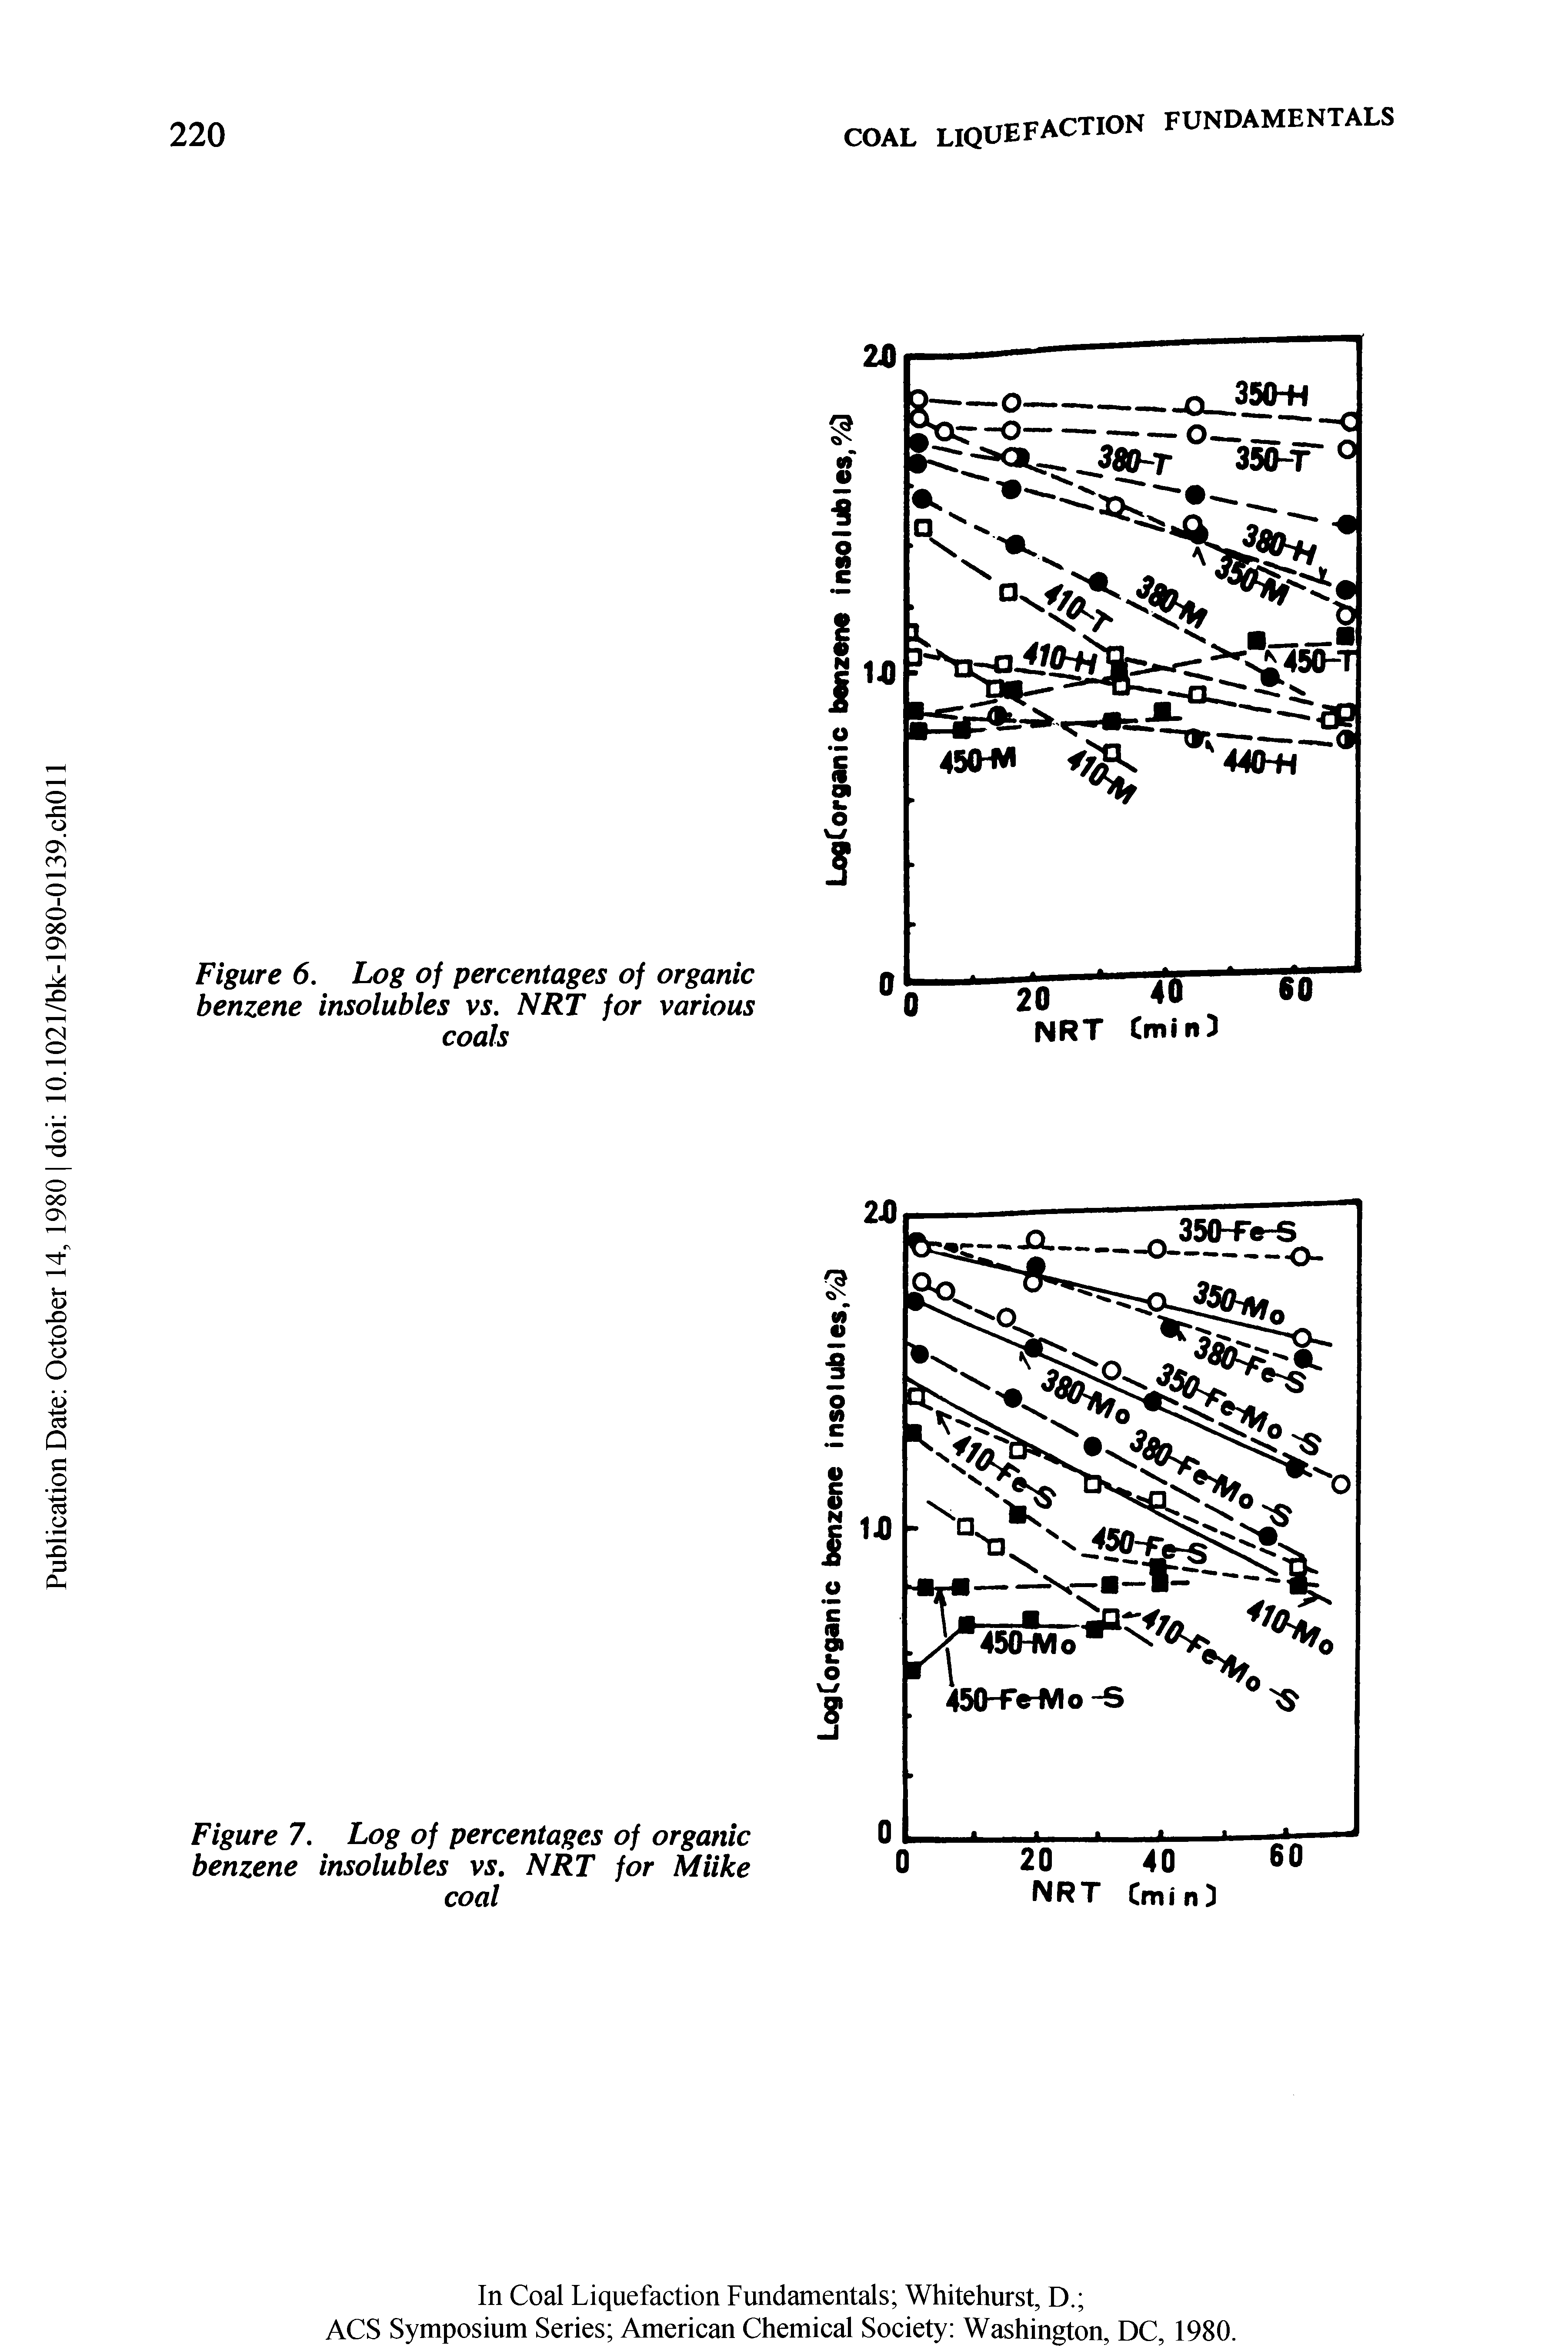 Figure 6. Log of percentages of organic benzene insolubles vs. NRT for various coals...